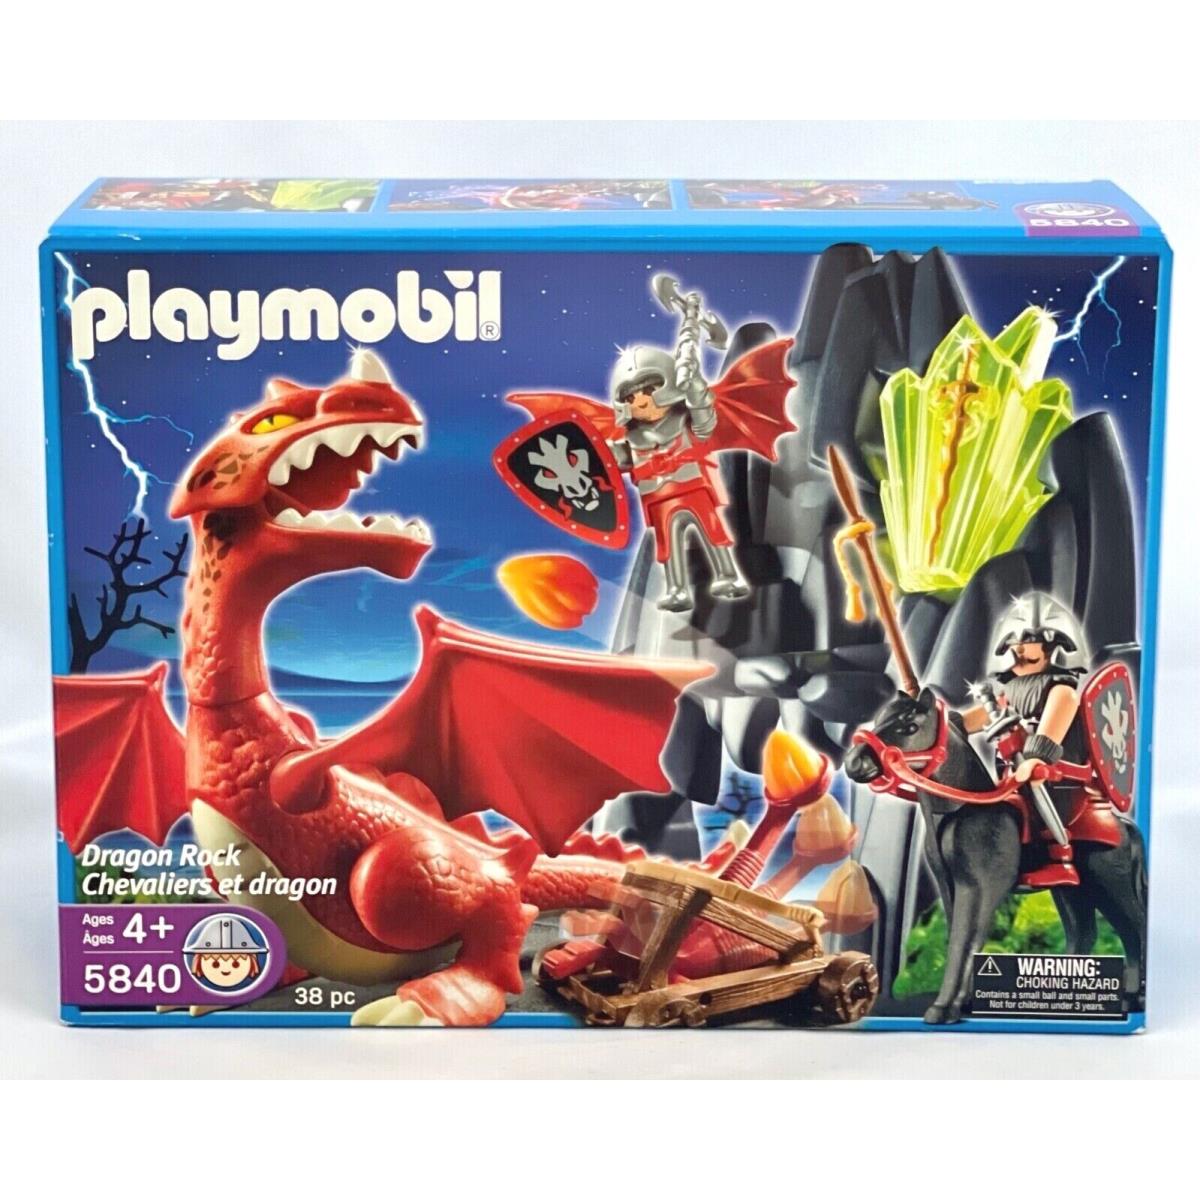 Playmobil 5840 Red Dragon Rock Play Set Knights Armor Weapons Catapult